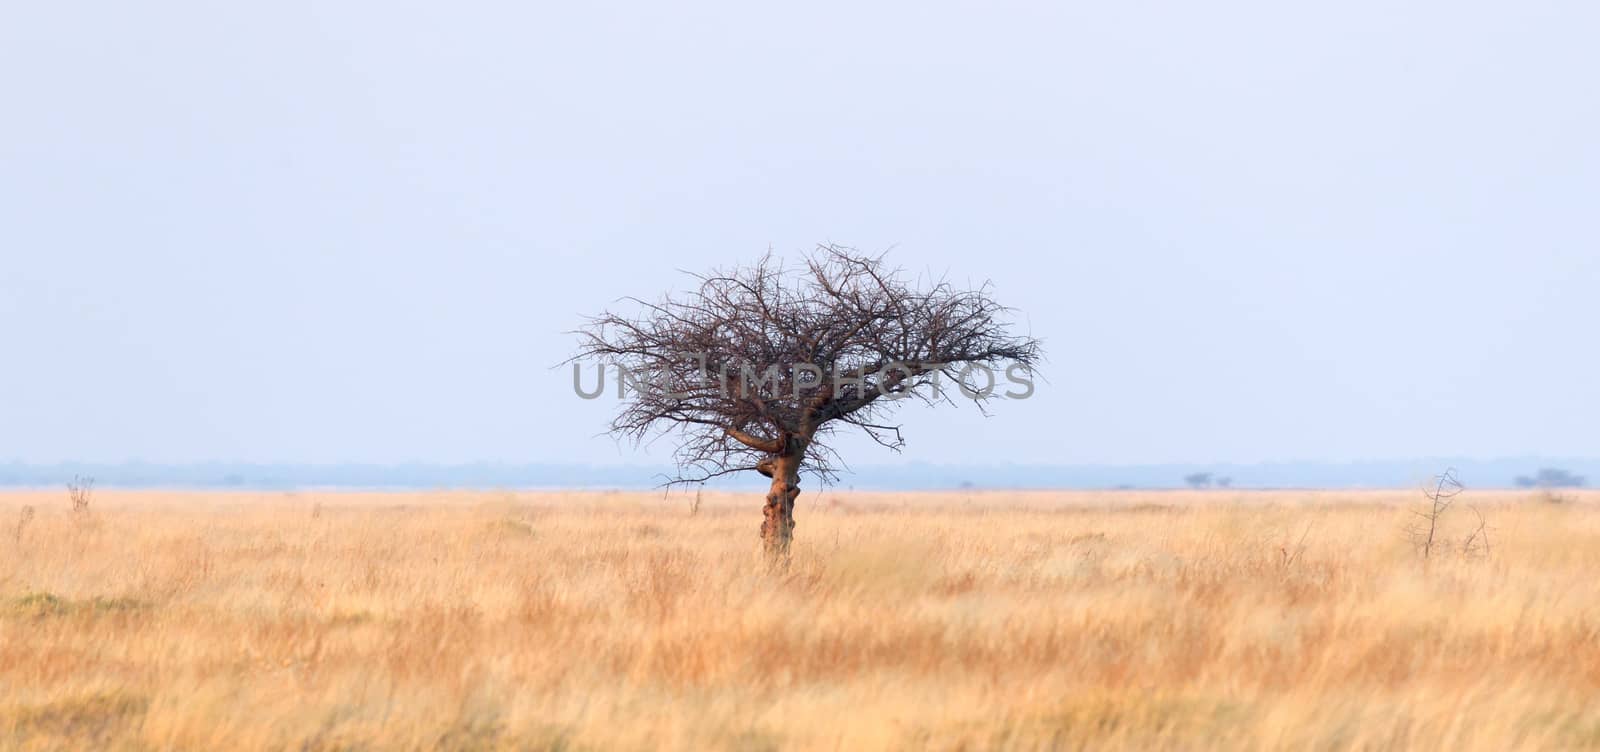 Thorn tree in the middle of the Kalahari by michaklootwijk